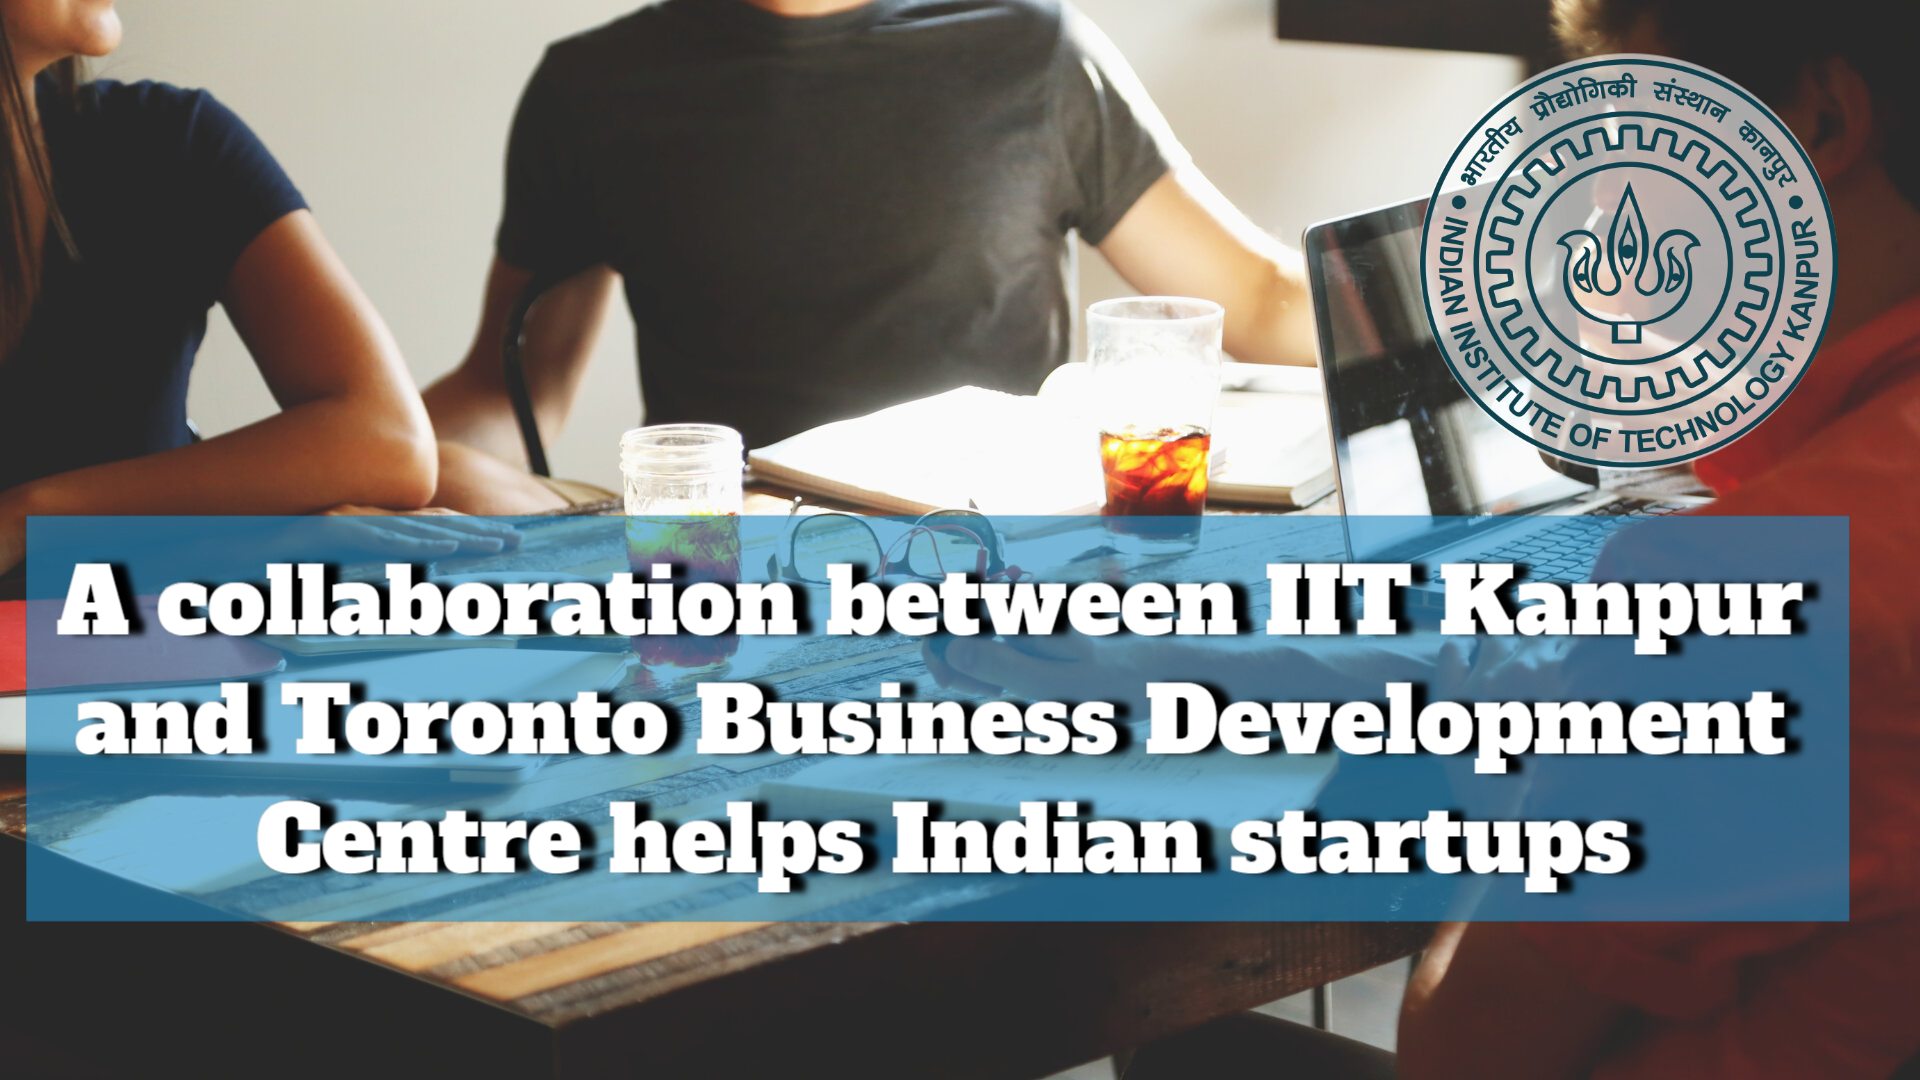 Indian startups are helped by a collaboration between IIT Kanpur and Toronto Business Development Centre